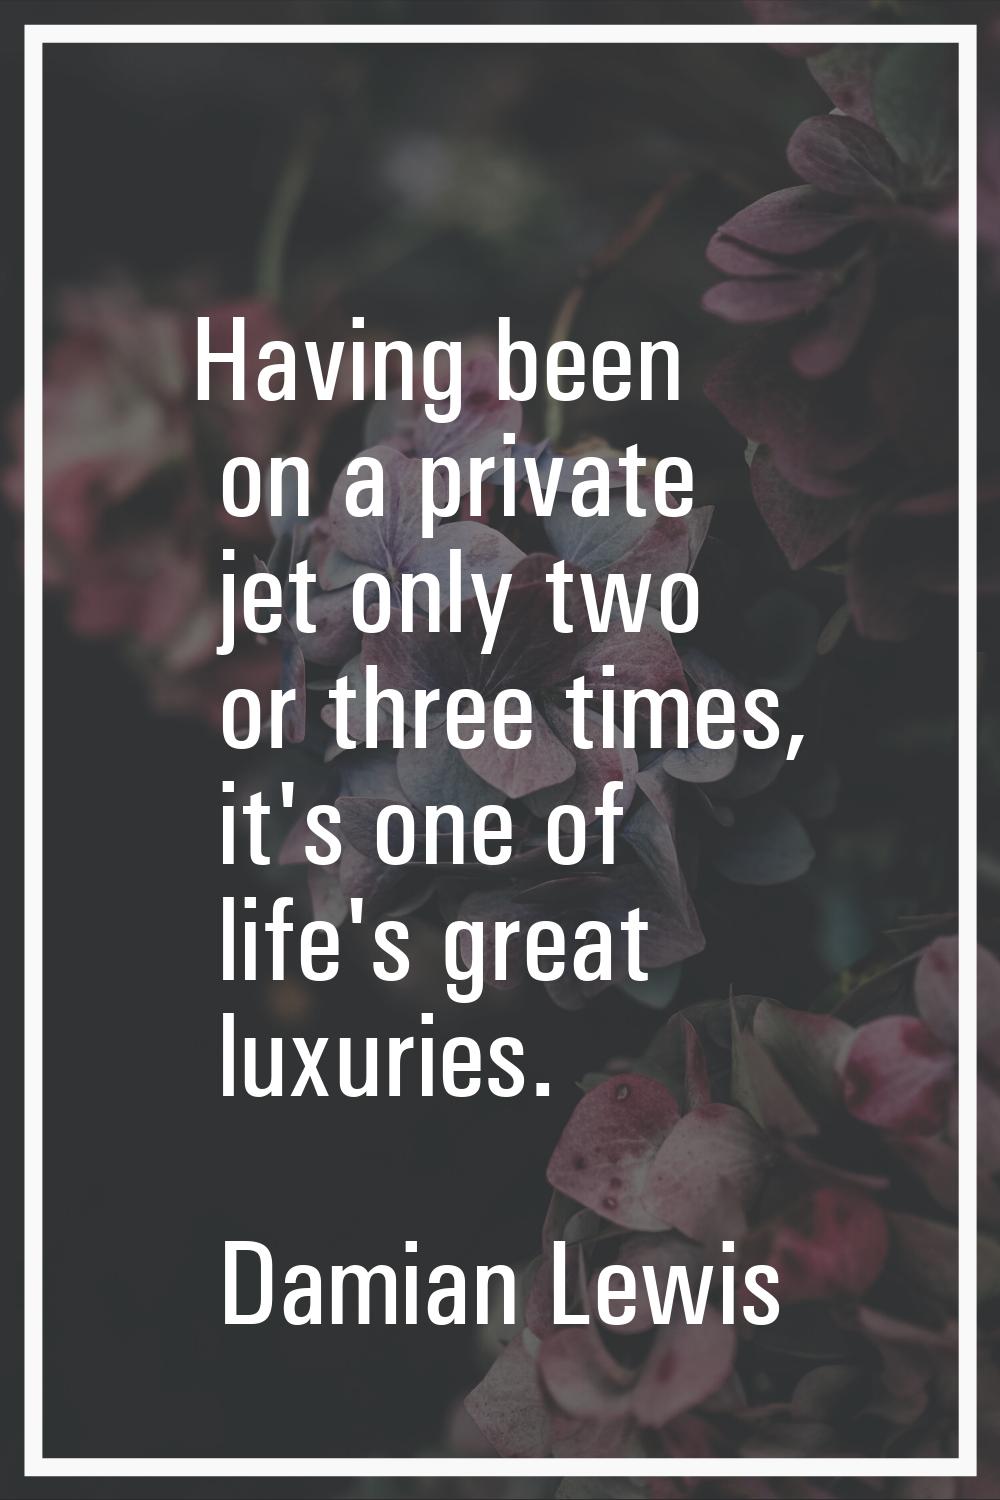 Having been on a private jet only two or three times, it's one of life's great luxuries.